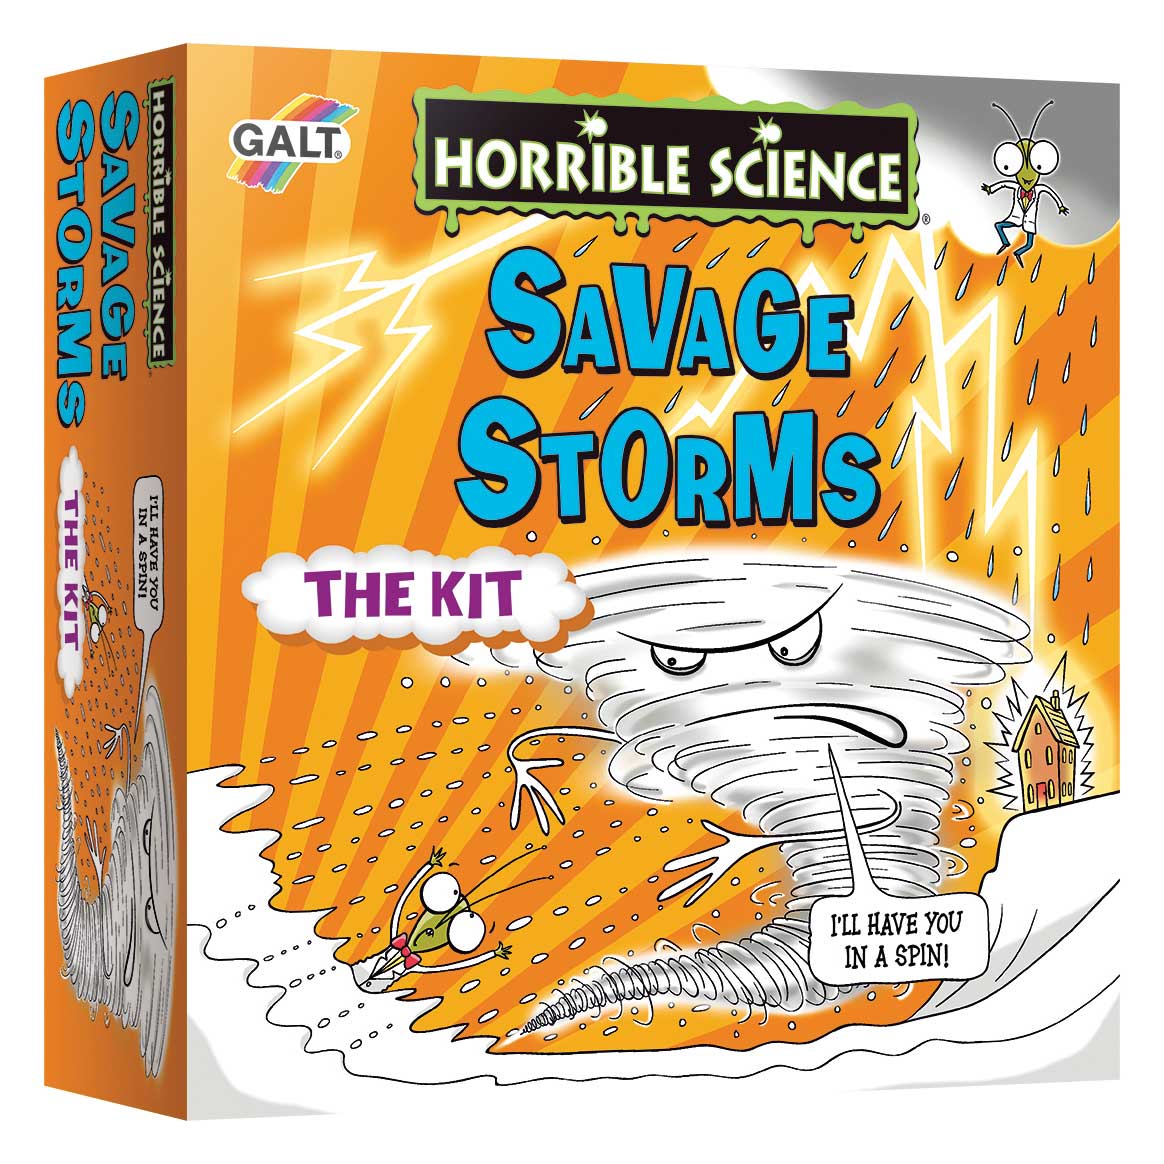 Horrible Science – Savage Storms (4M-LL5440)